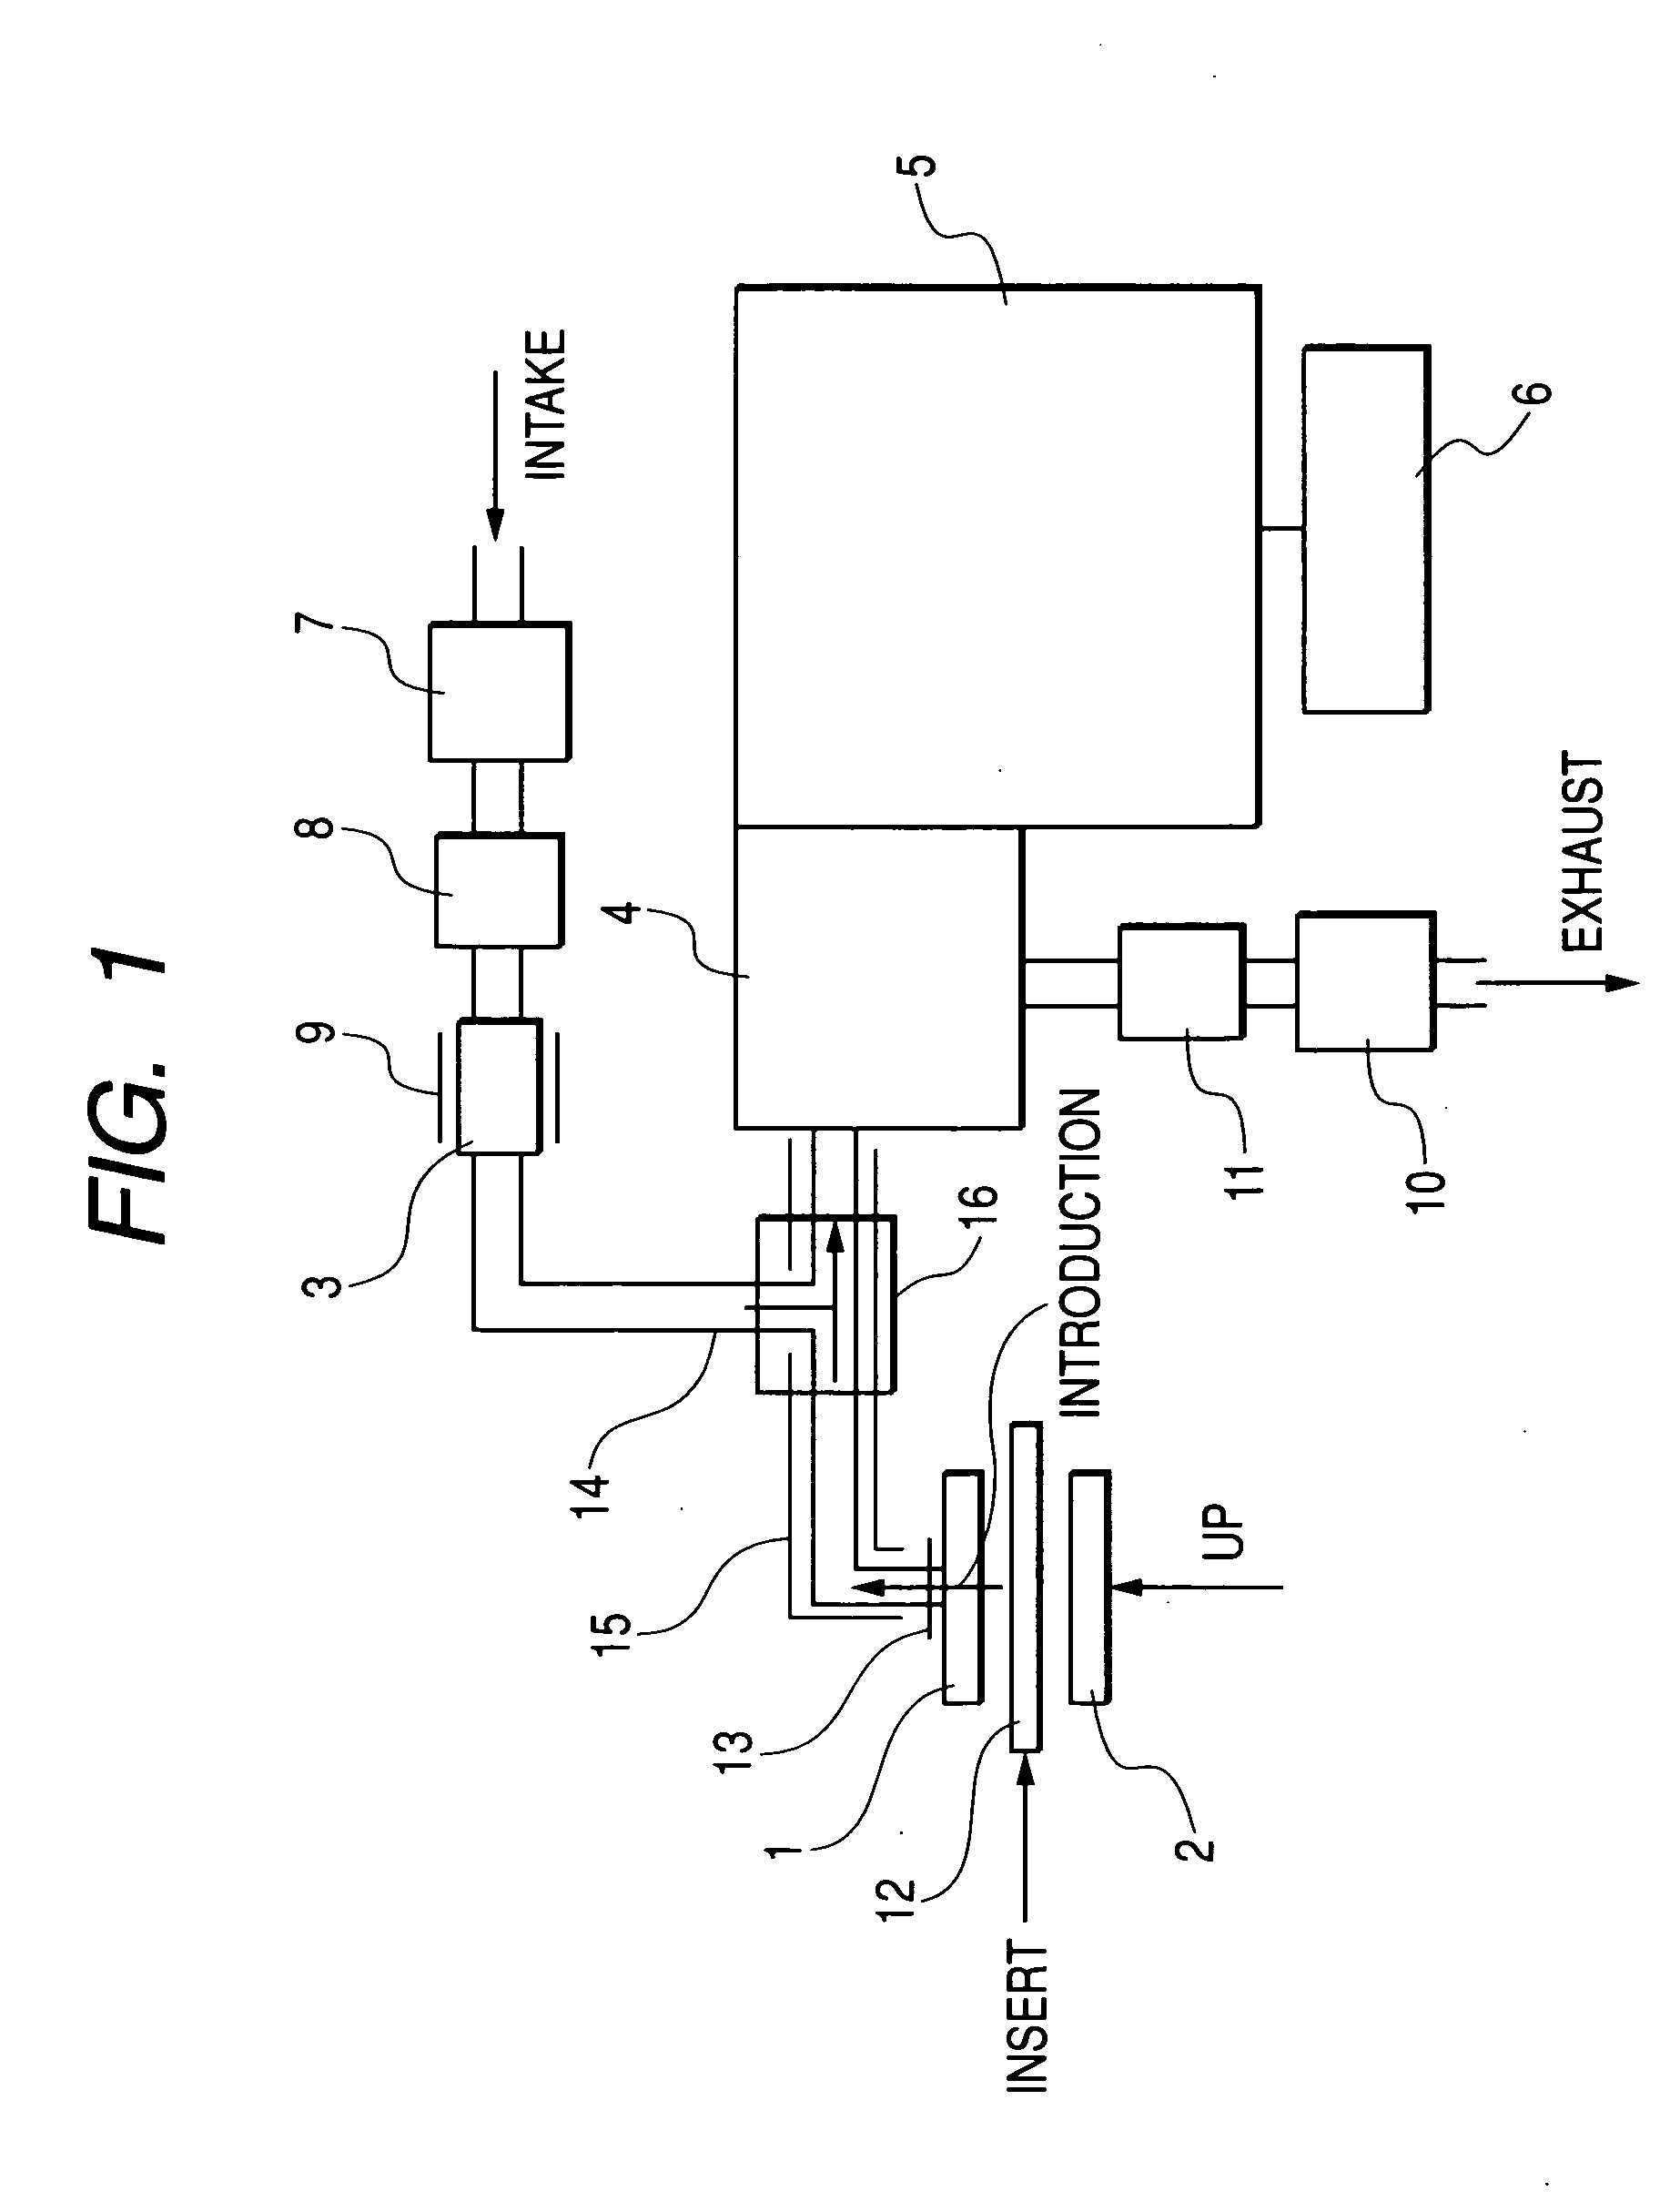 Apparatus for detecting chemical substances and method therefor